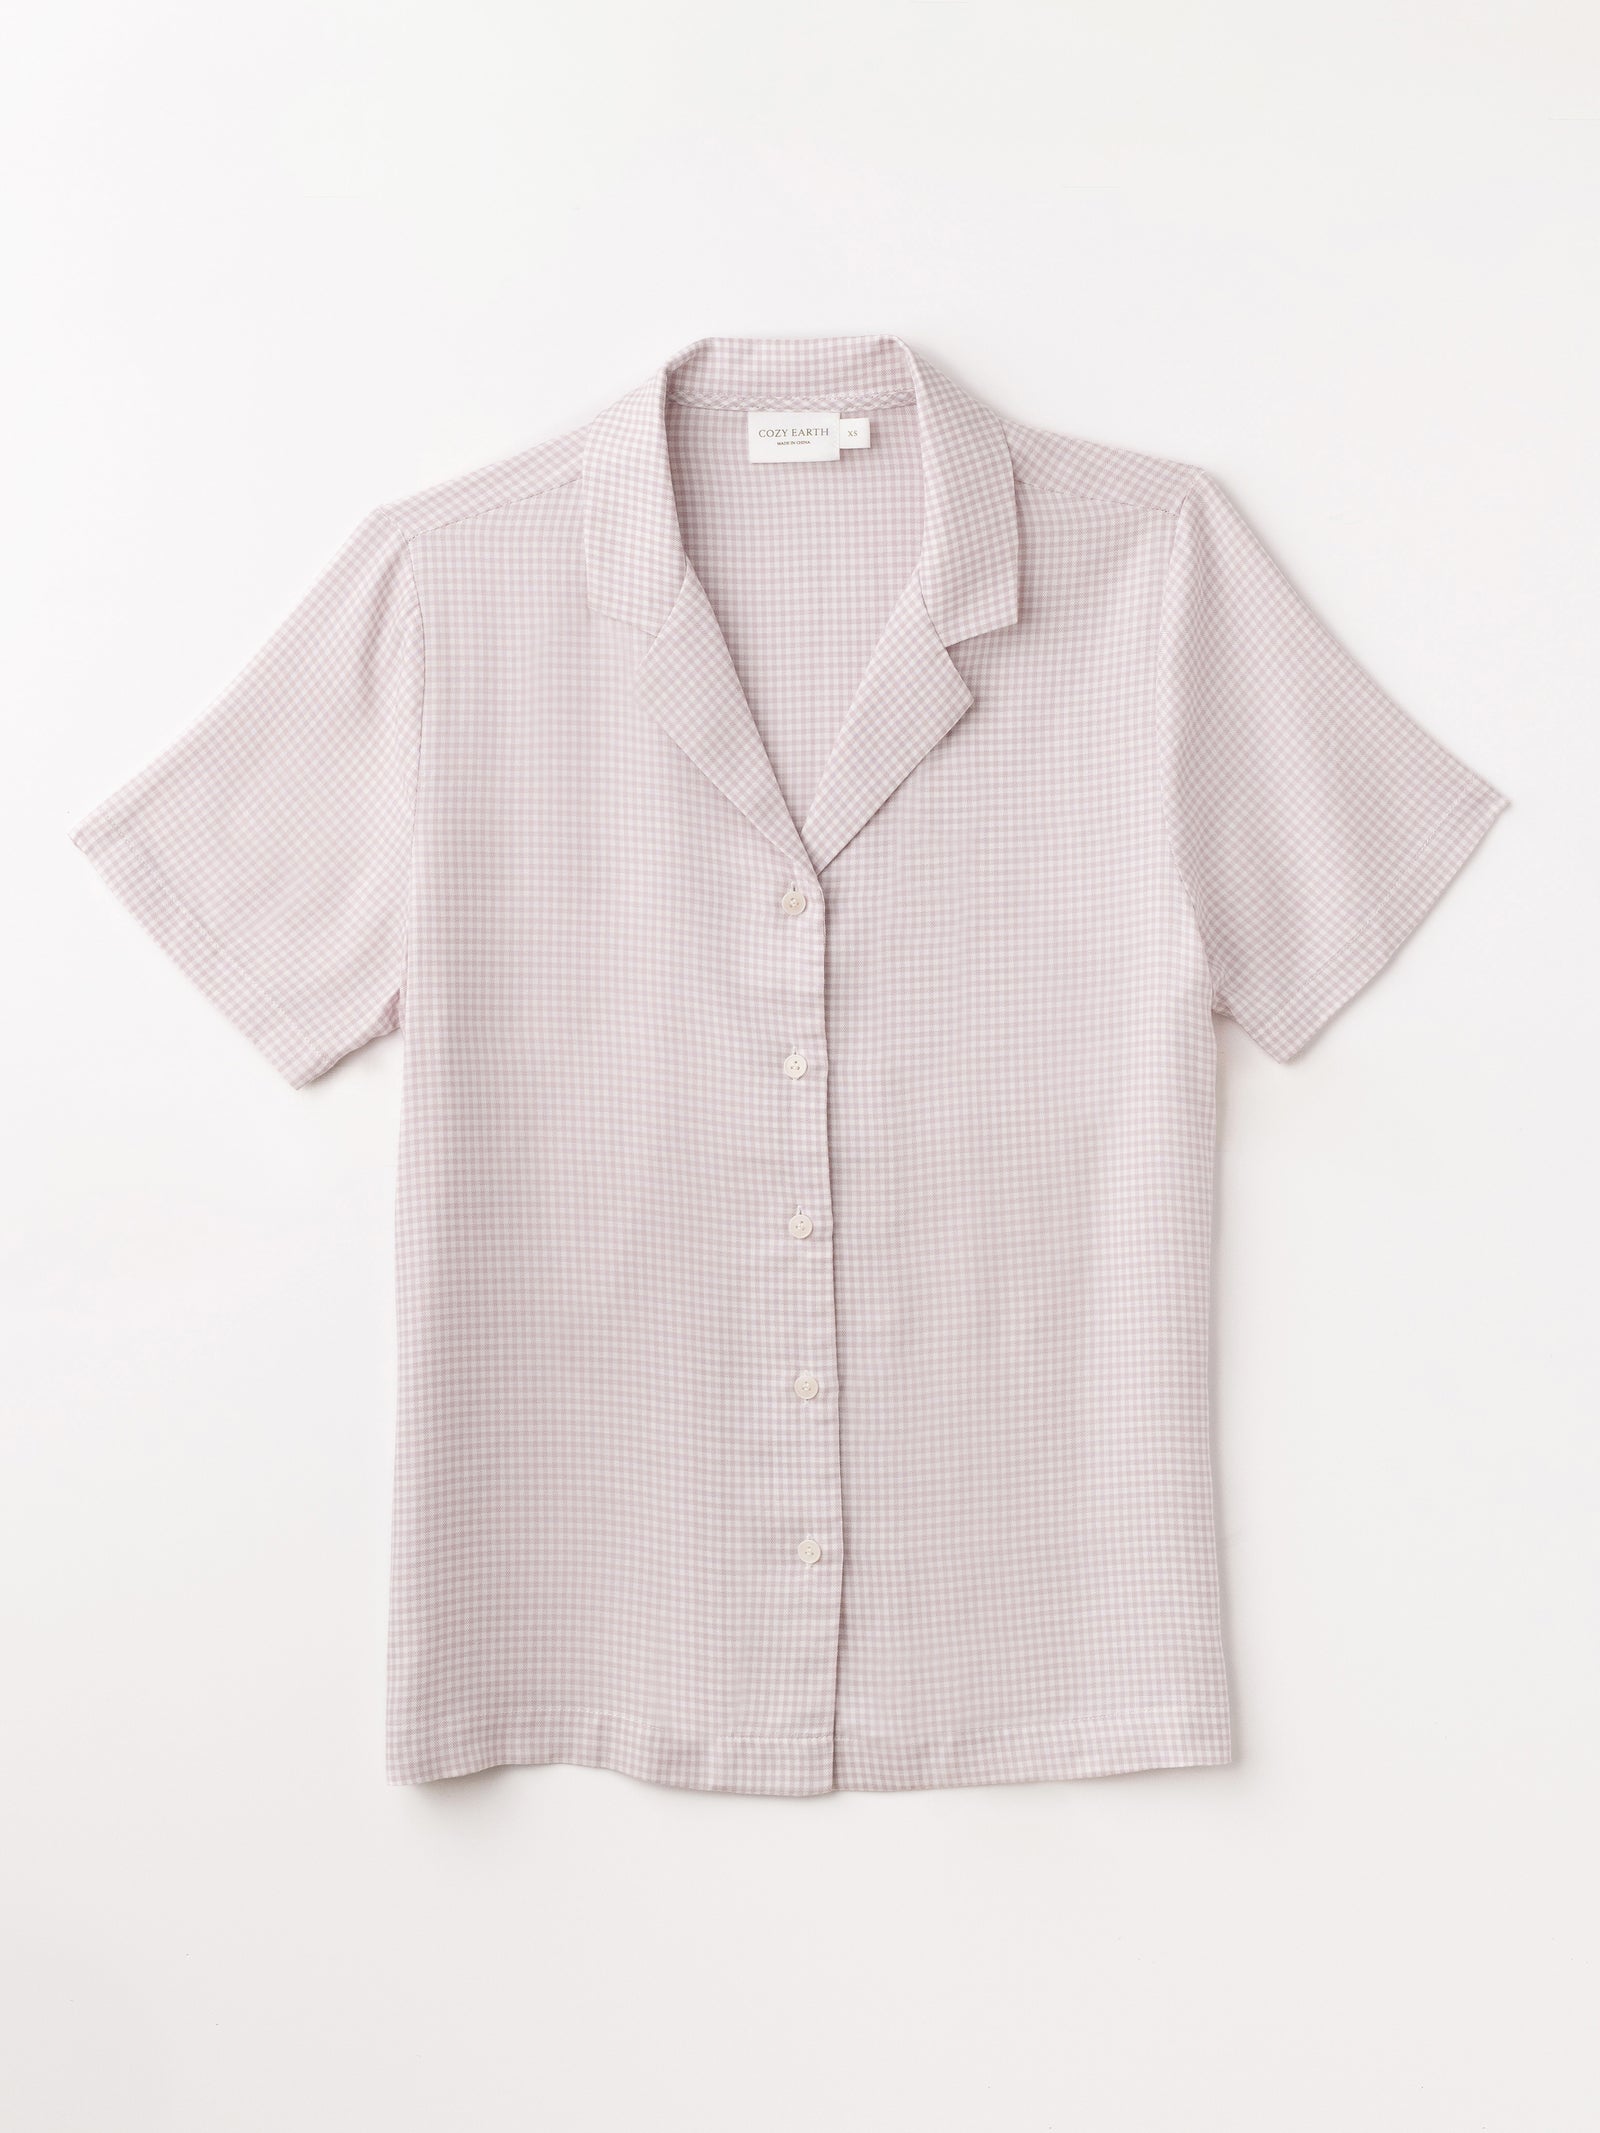 Lavender Mini Gingham Soft Woven Short Sleeve Pajama top with white background 